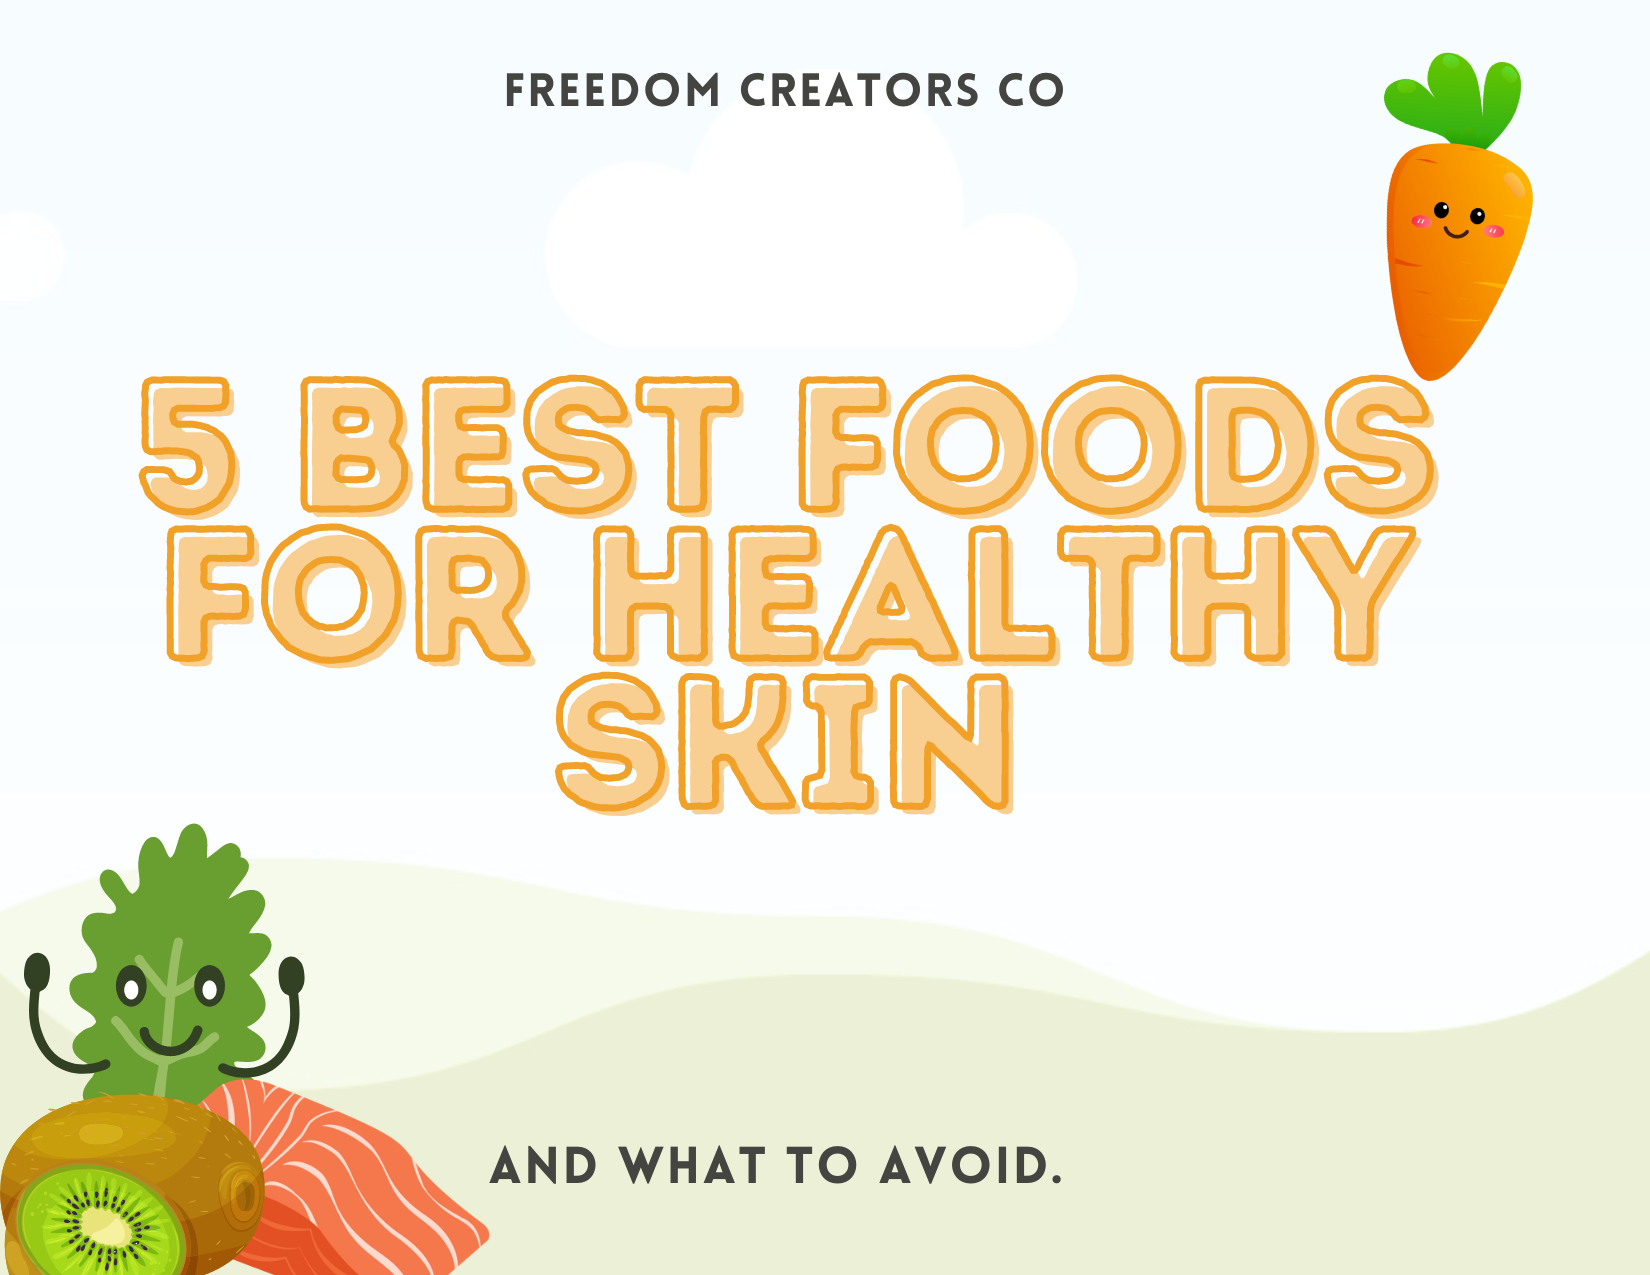 The 5 BEST Foods for Healthy Skin